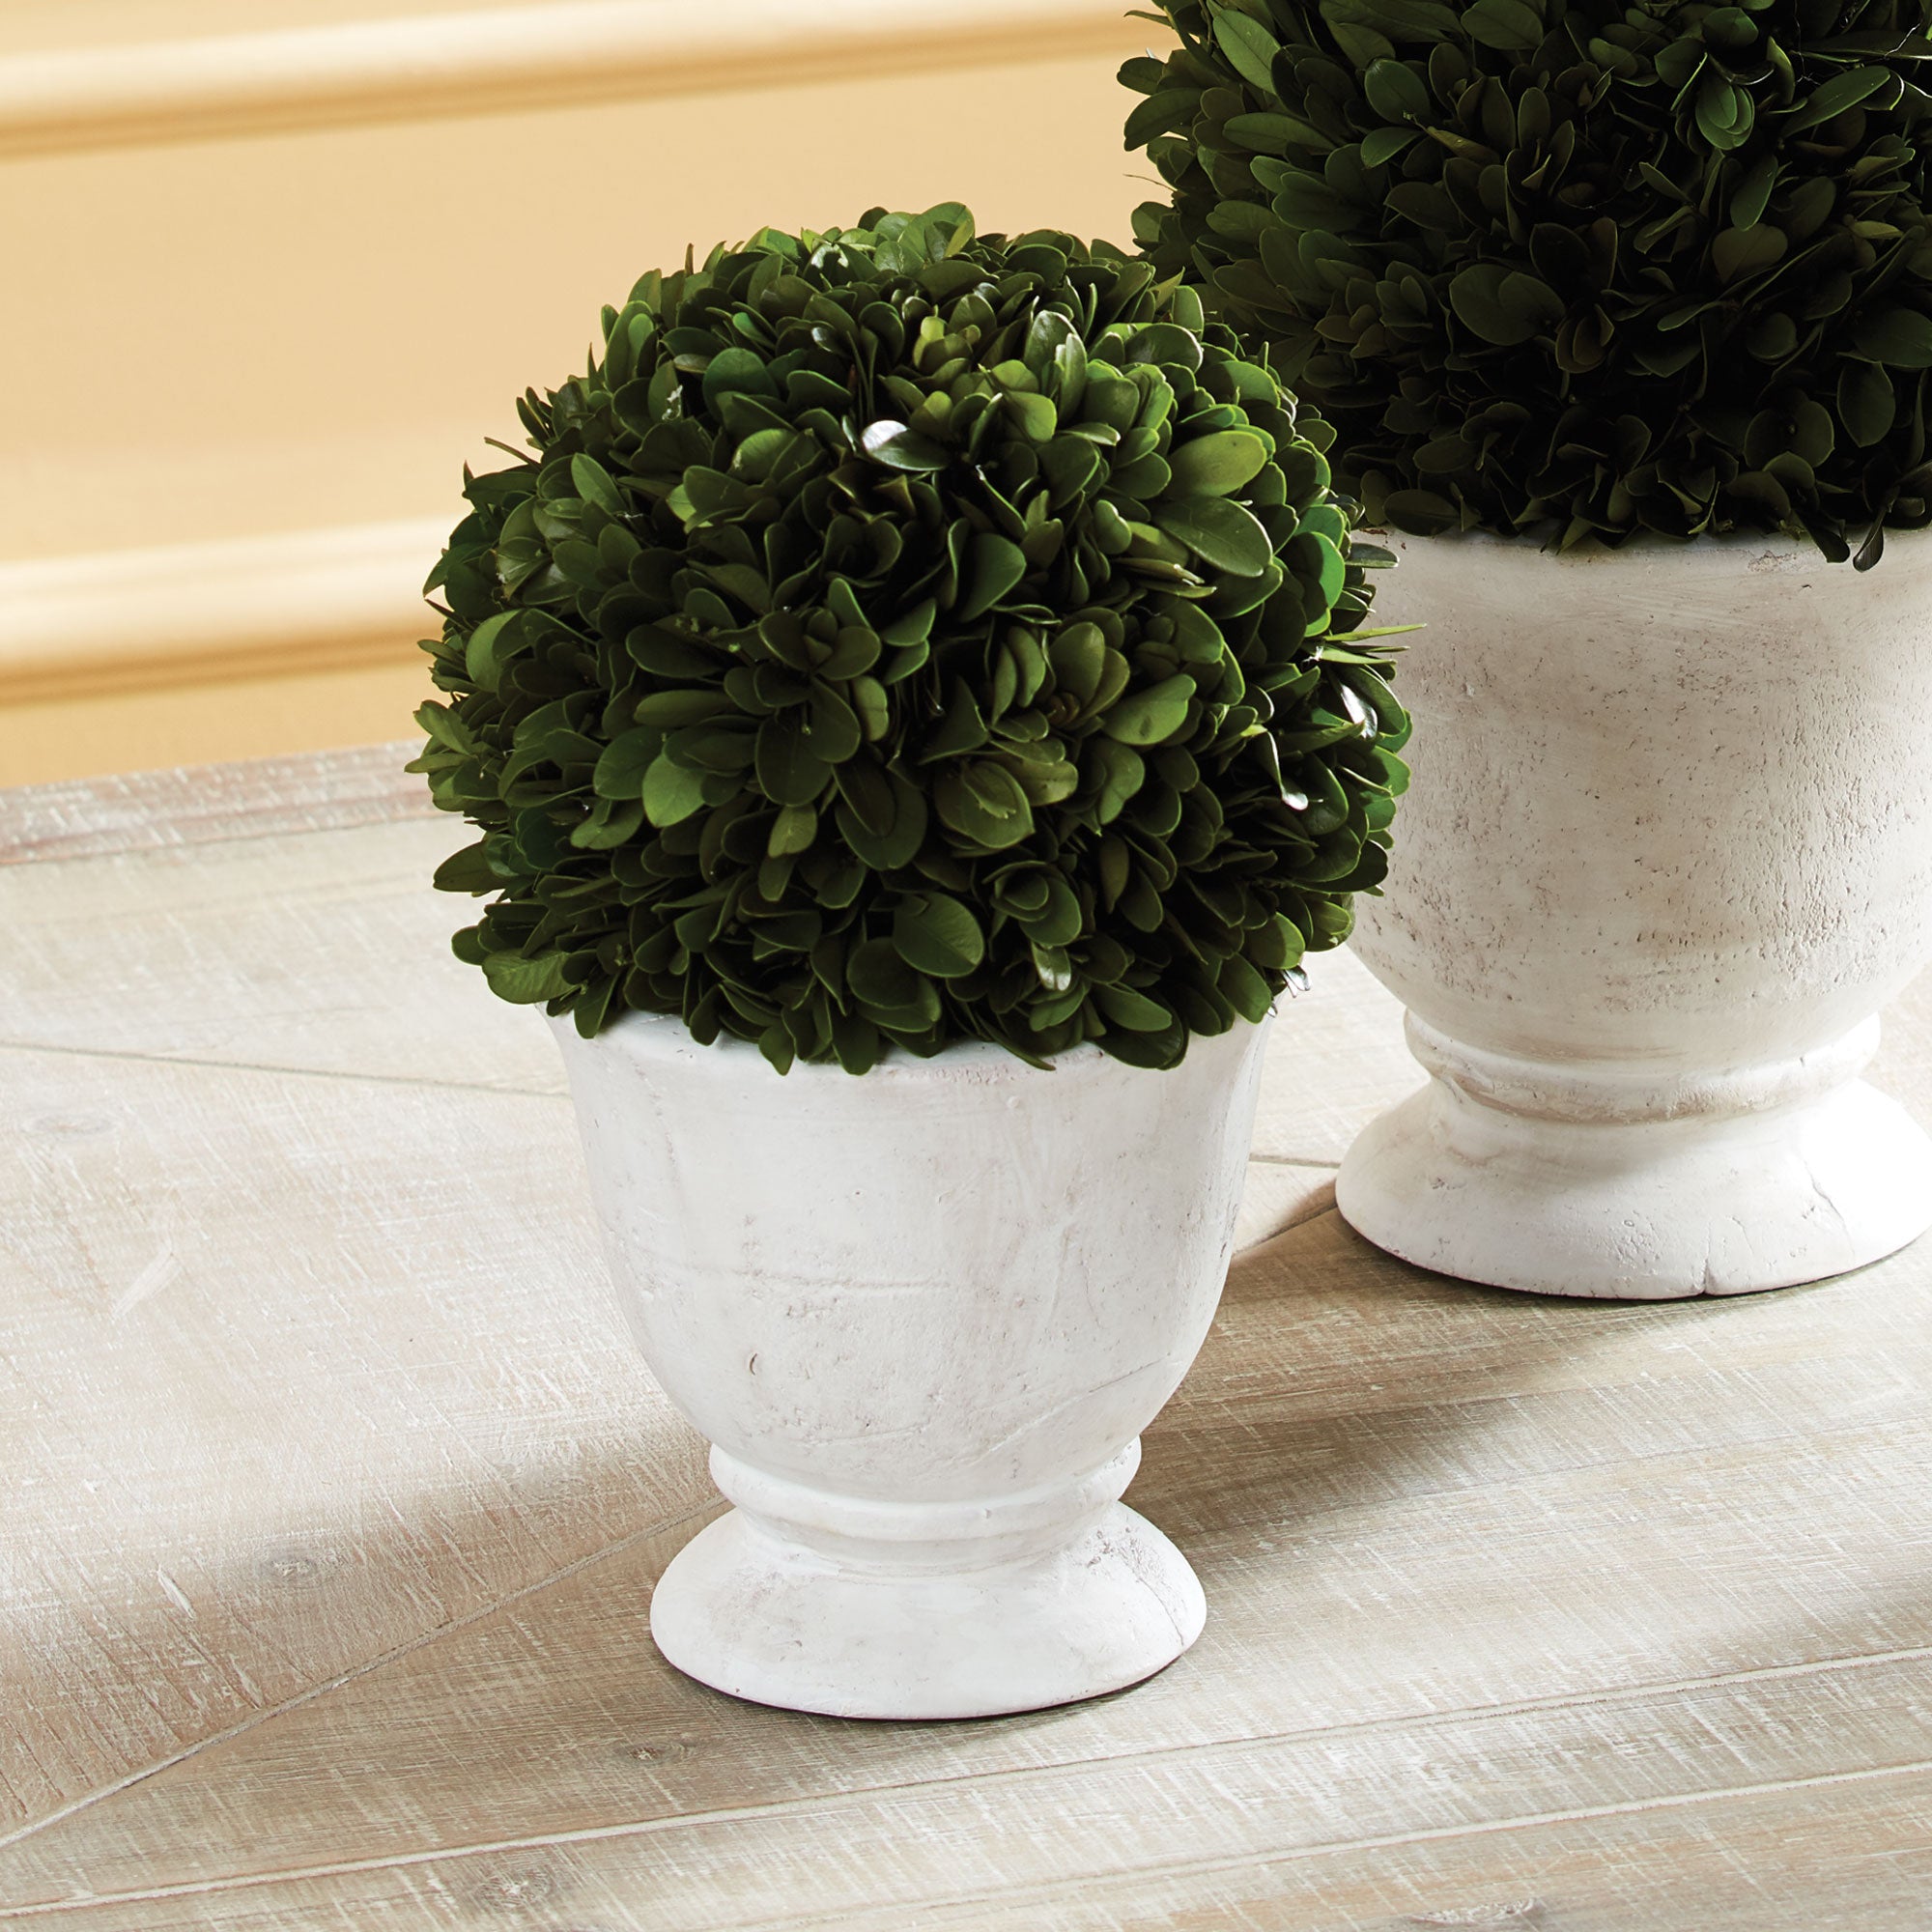 Real English boxwoods, preserved and painstakingly assembled by our masterful artists. Artfully arranged and preserved to perfection. Paired with a simple white matte ceramic pot, a perfect accent for entry or anywhere. Amethyst Home provides interior design, new construction, custom furniture, and area rugs in the Los Angeles metro area.